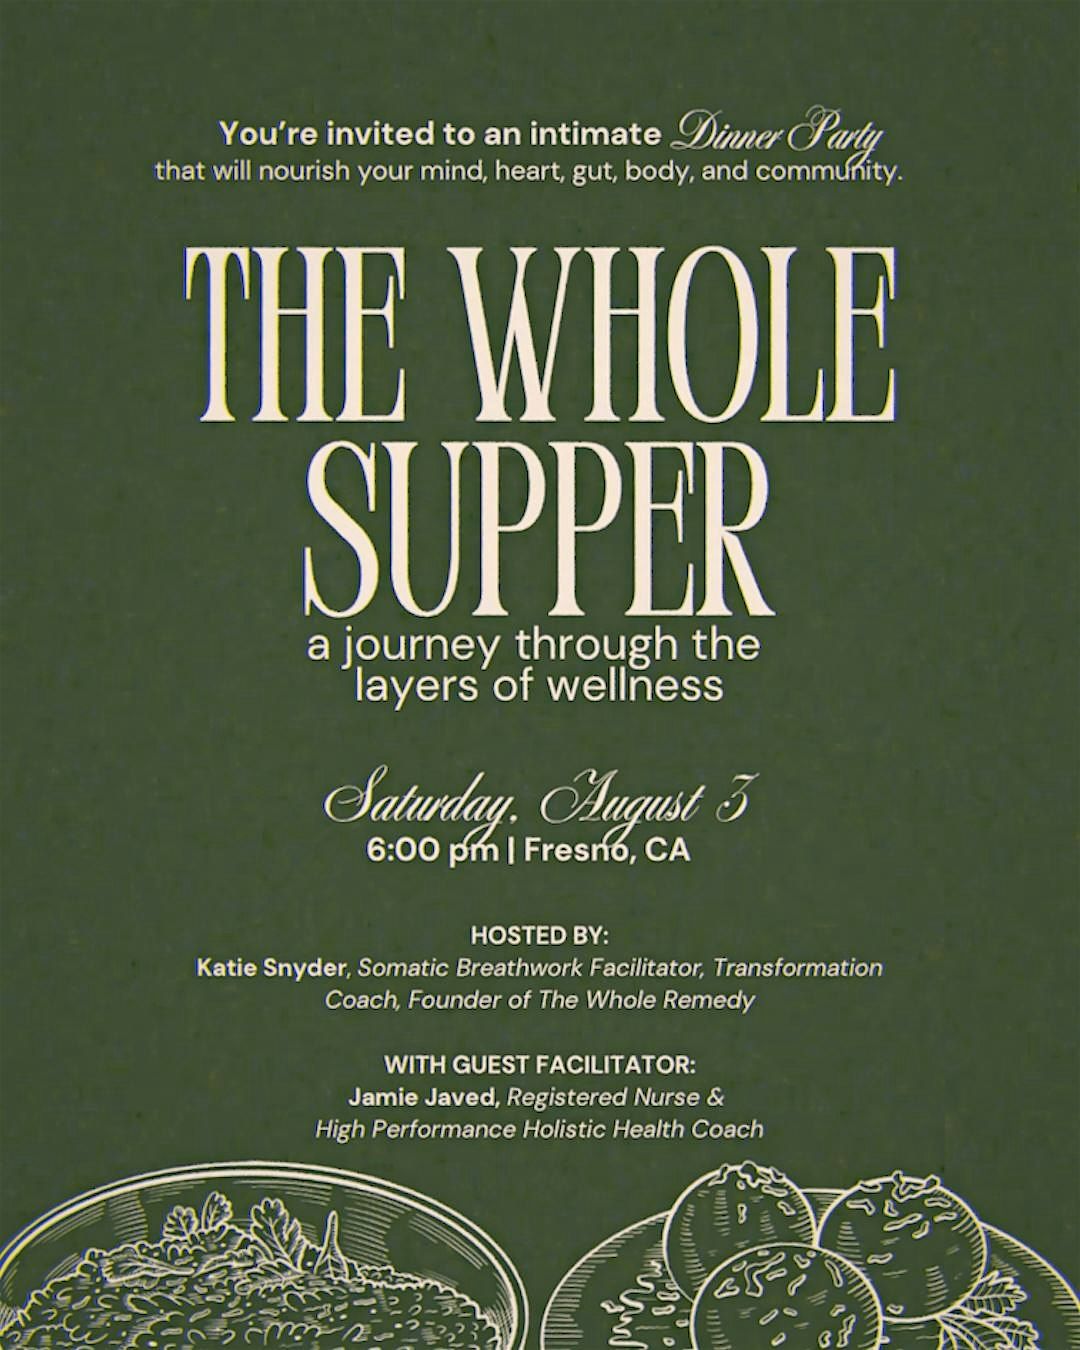 THE WHOLE SUPPER: a journey through the layers of wellness